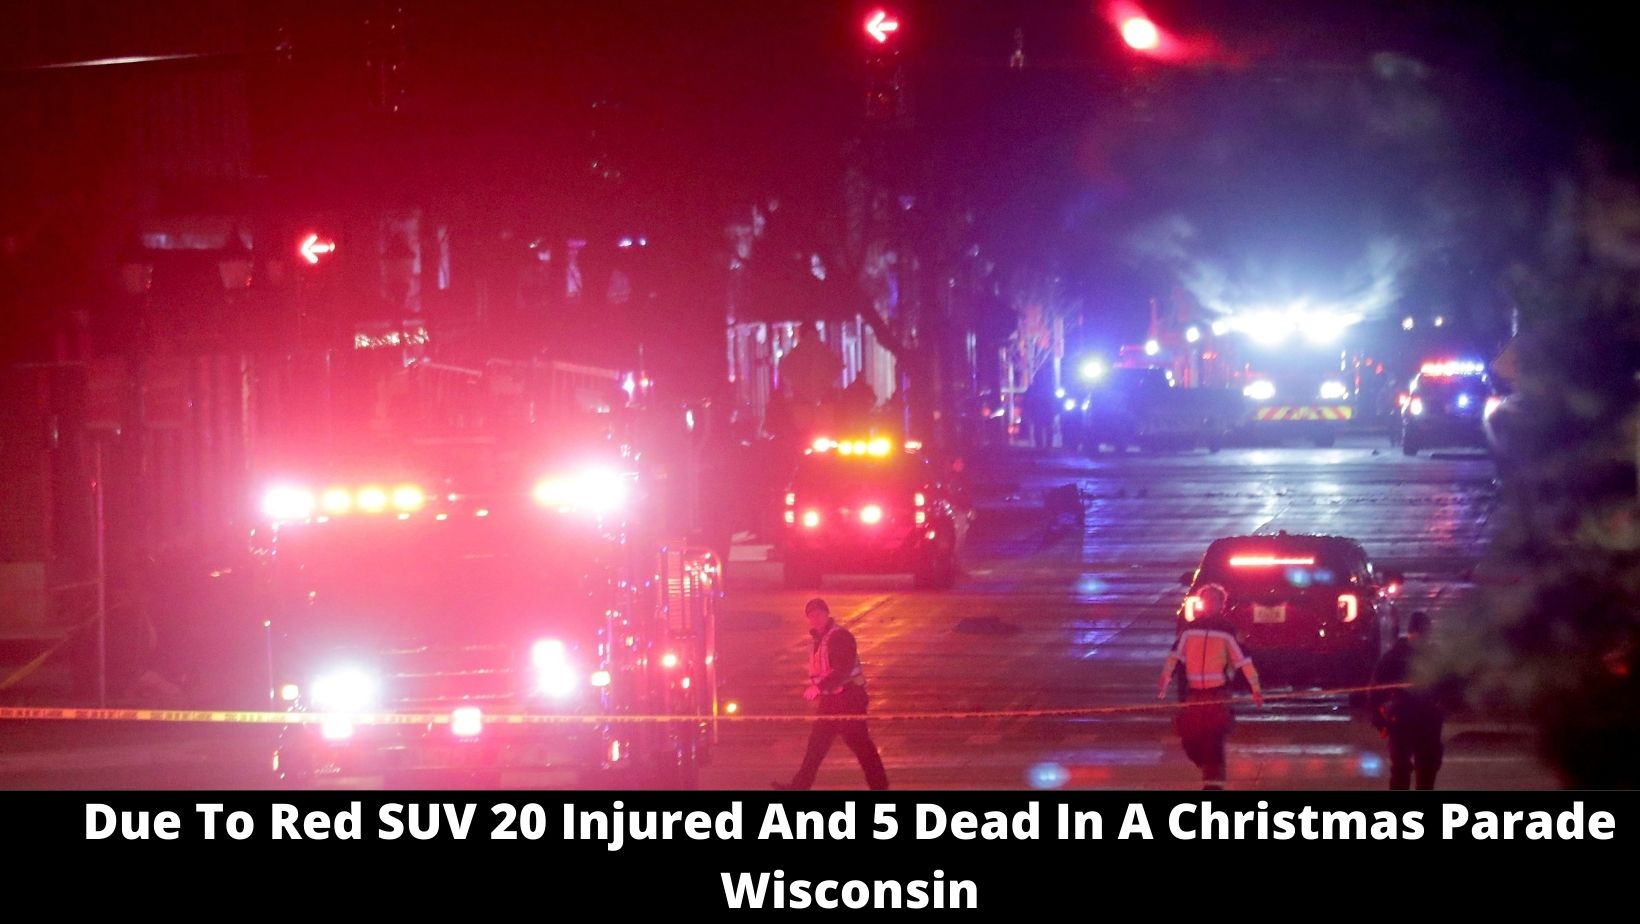 Due To Red SUV 20 Injured And 5 Dead In A Christmas Parade Wisconsin